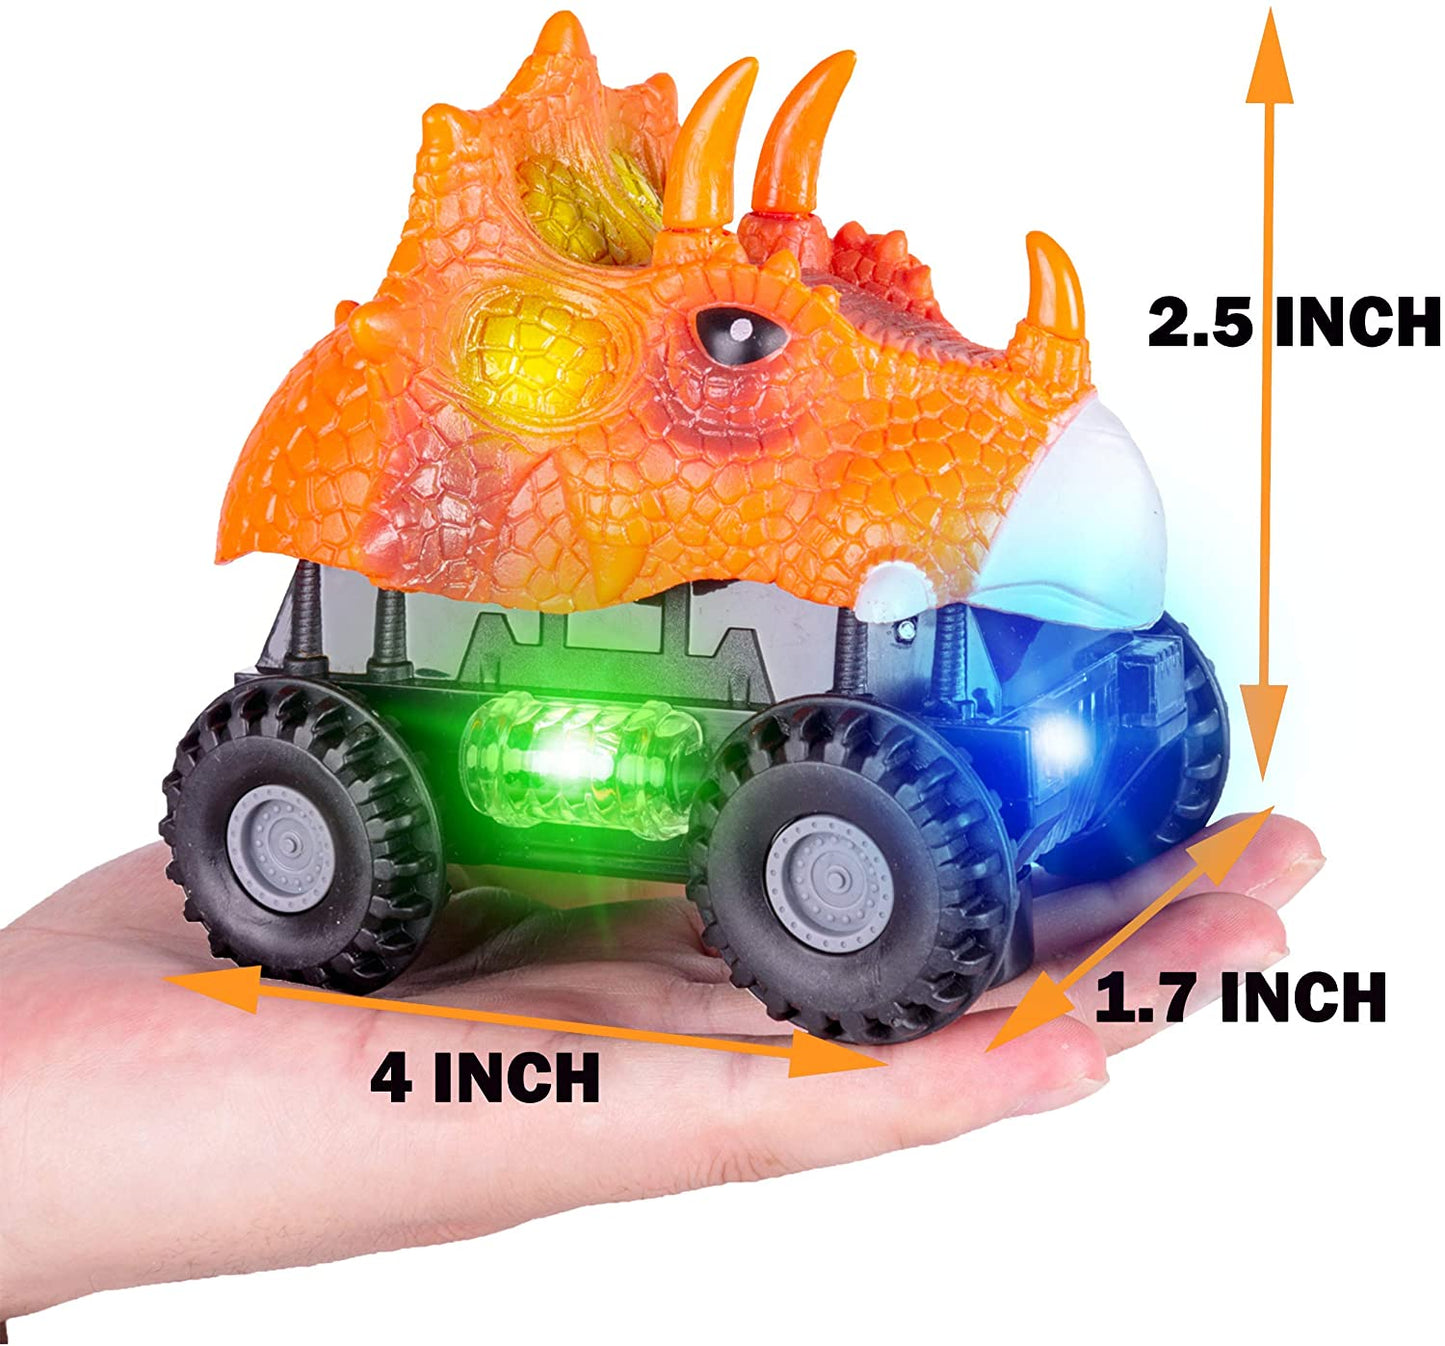 Dino Roaring LED Off-Road (Pack of 4)